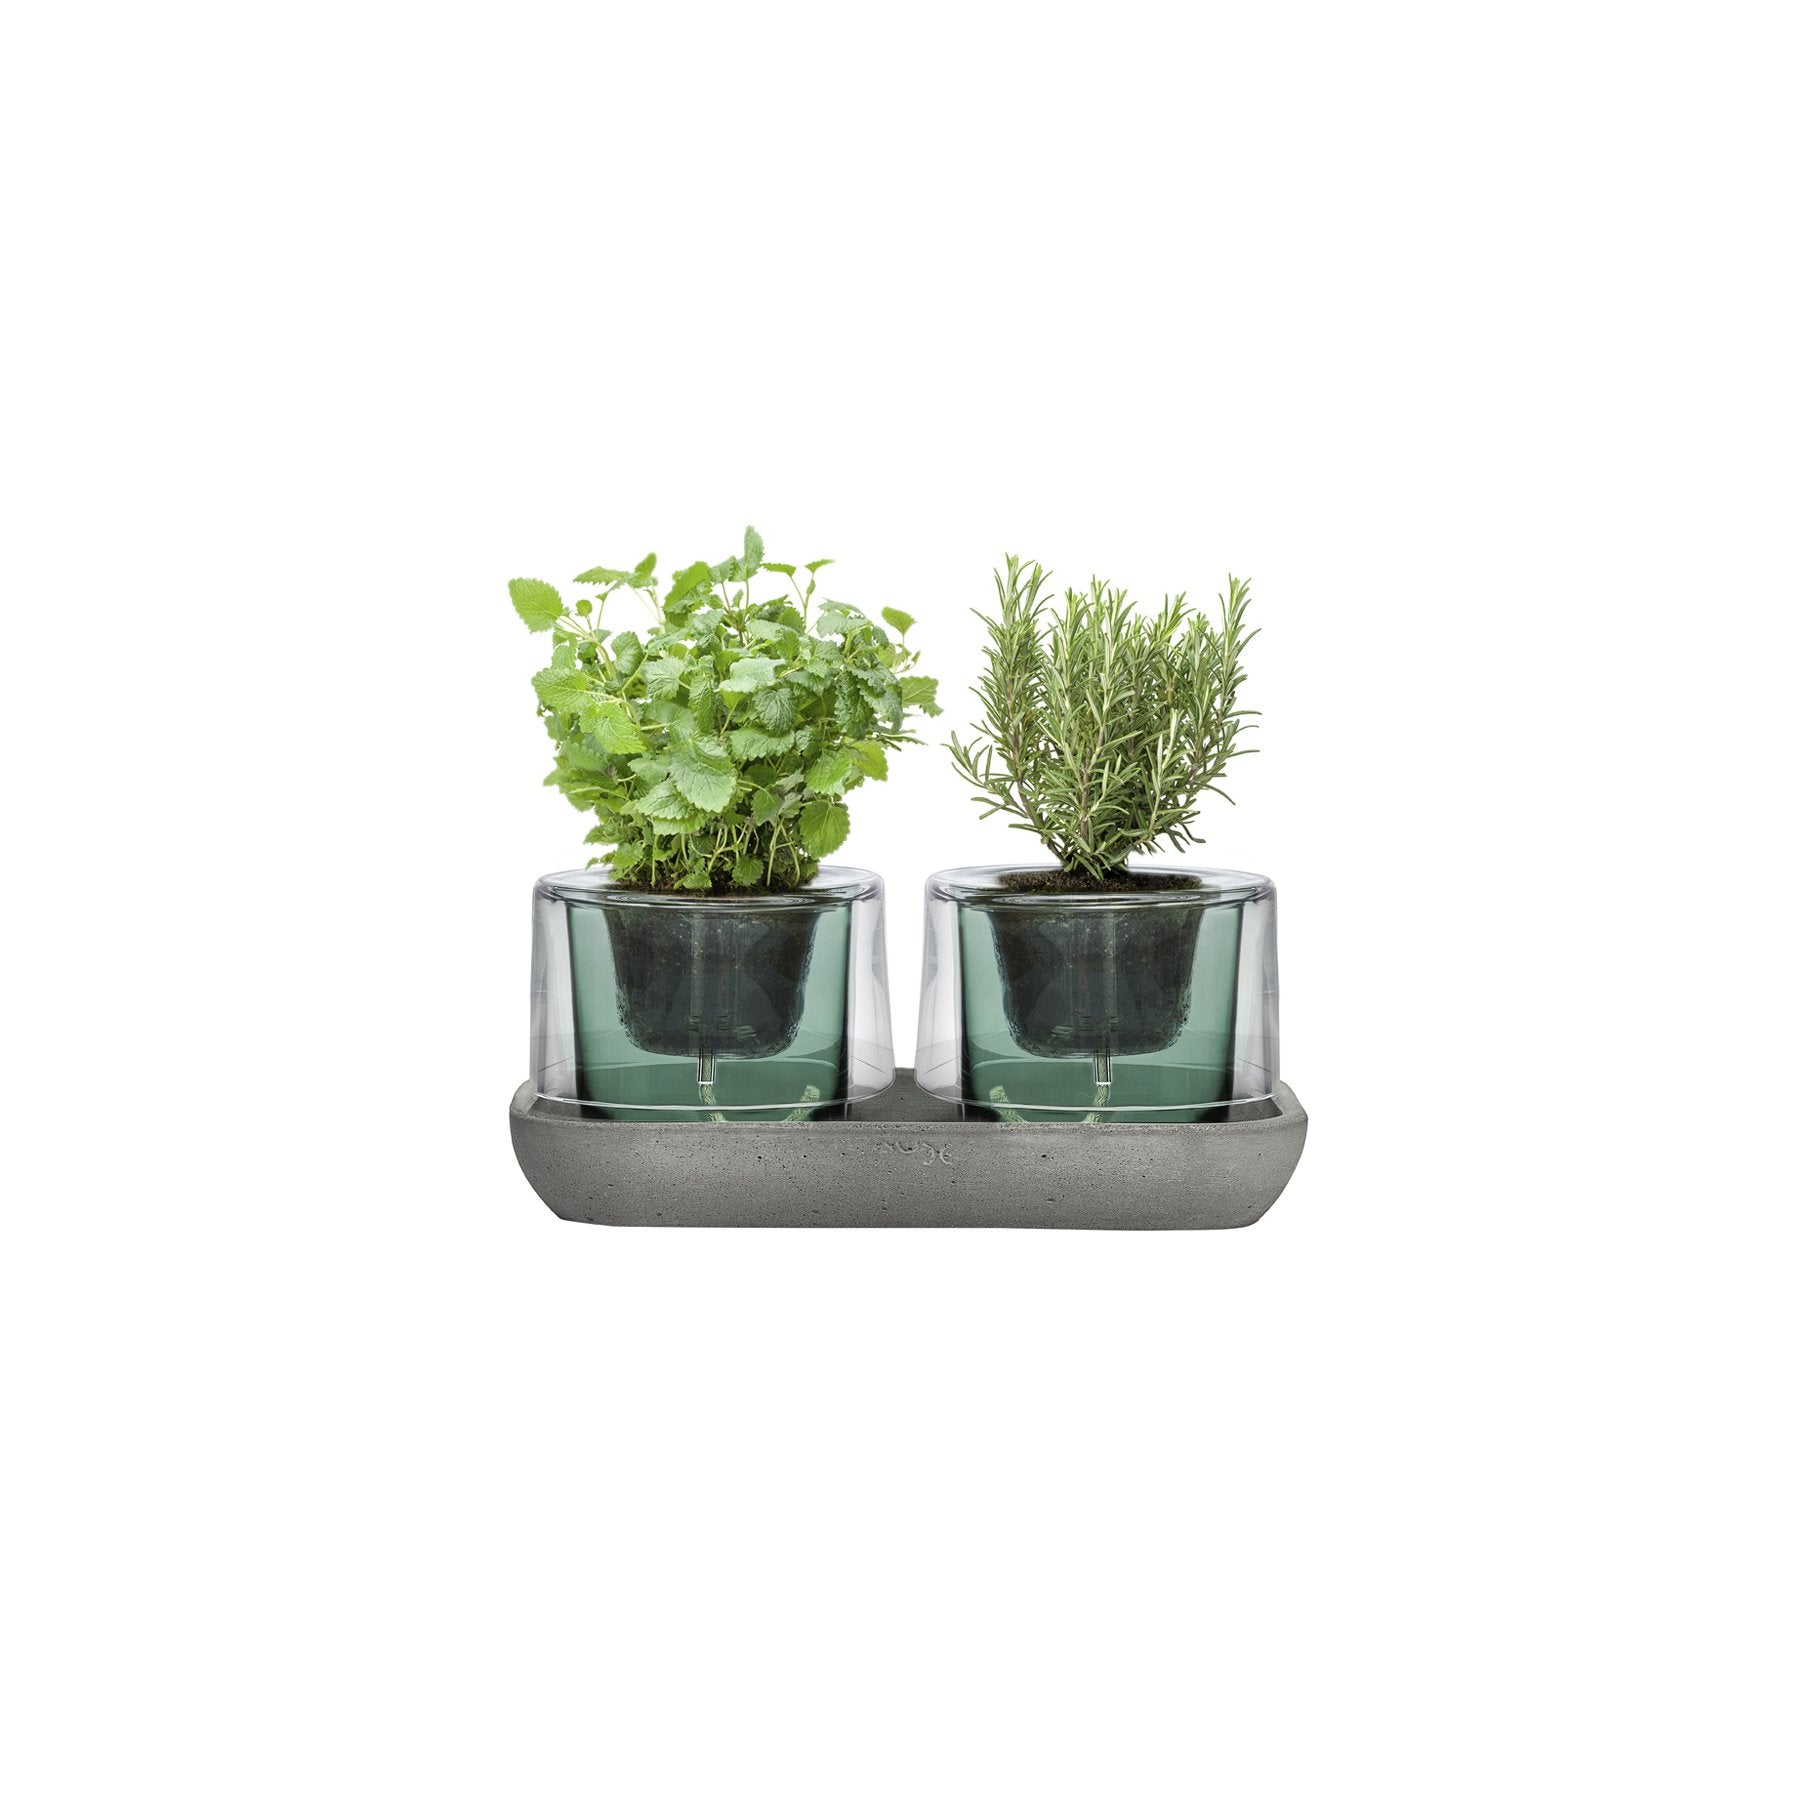 Roots Herbs Garden Clear Top with Green Base